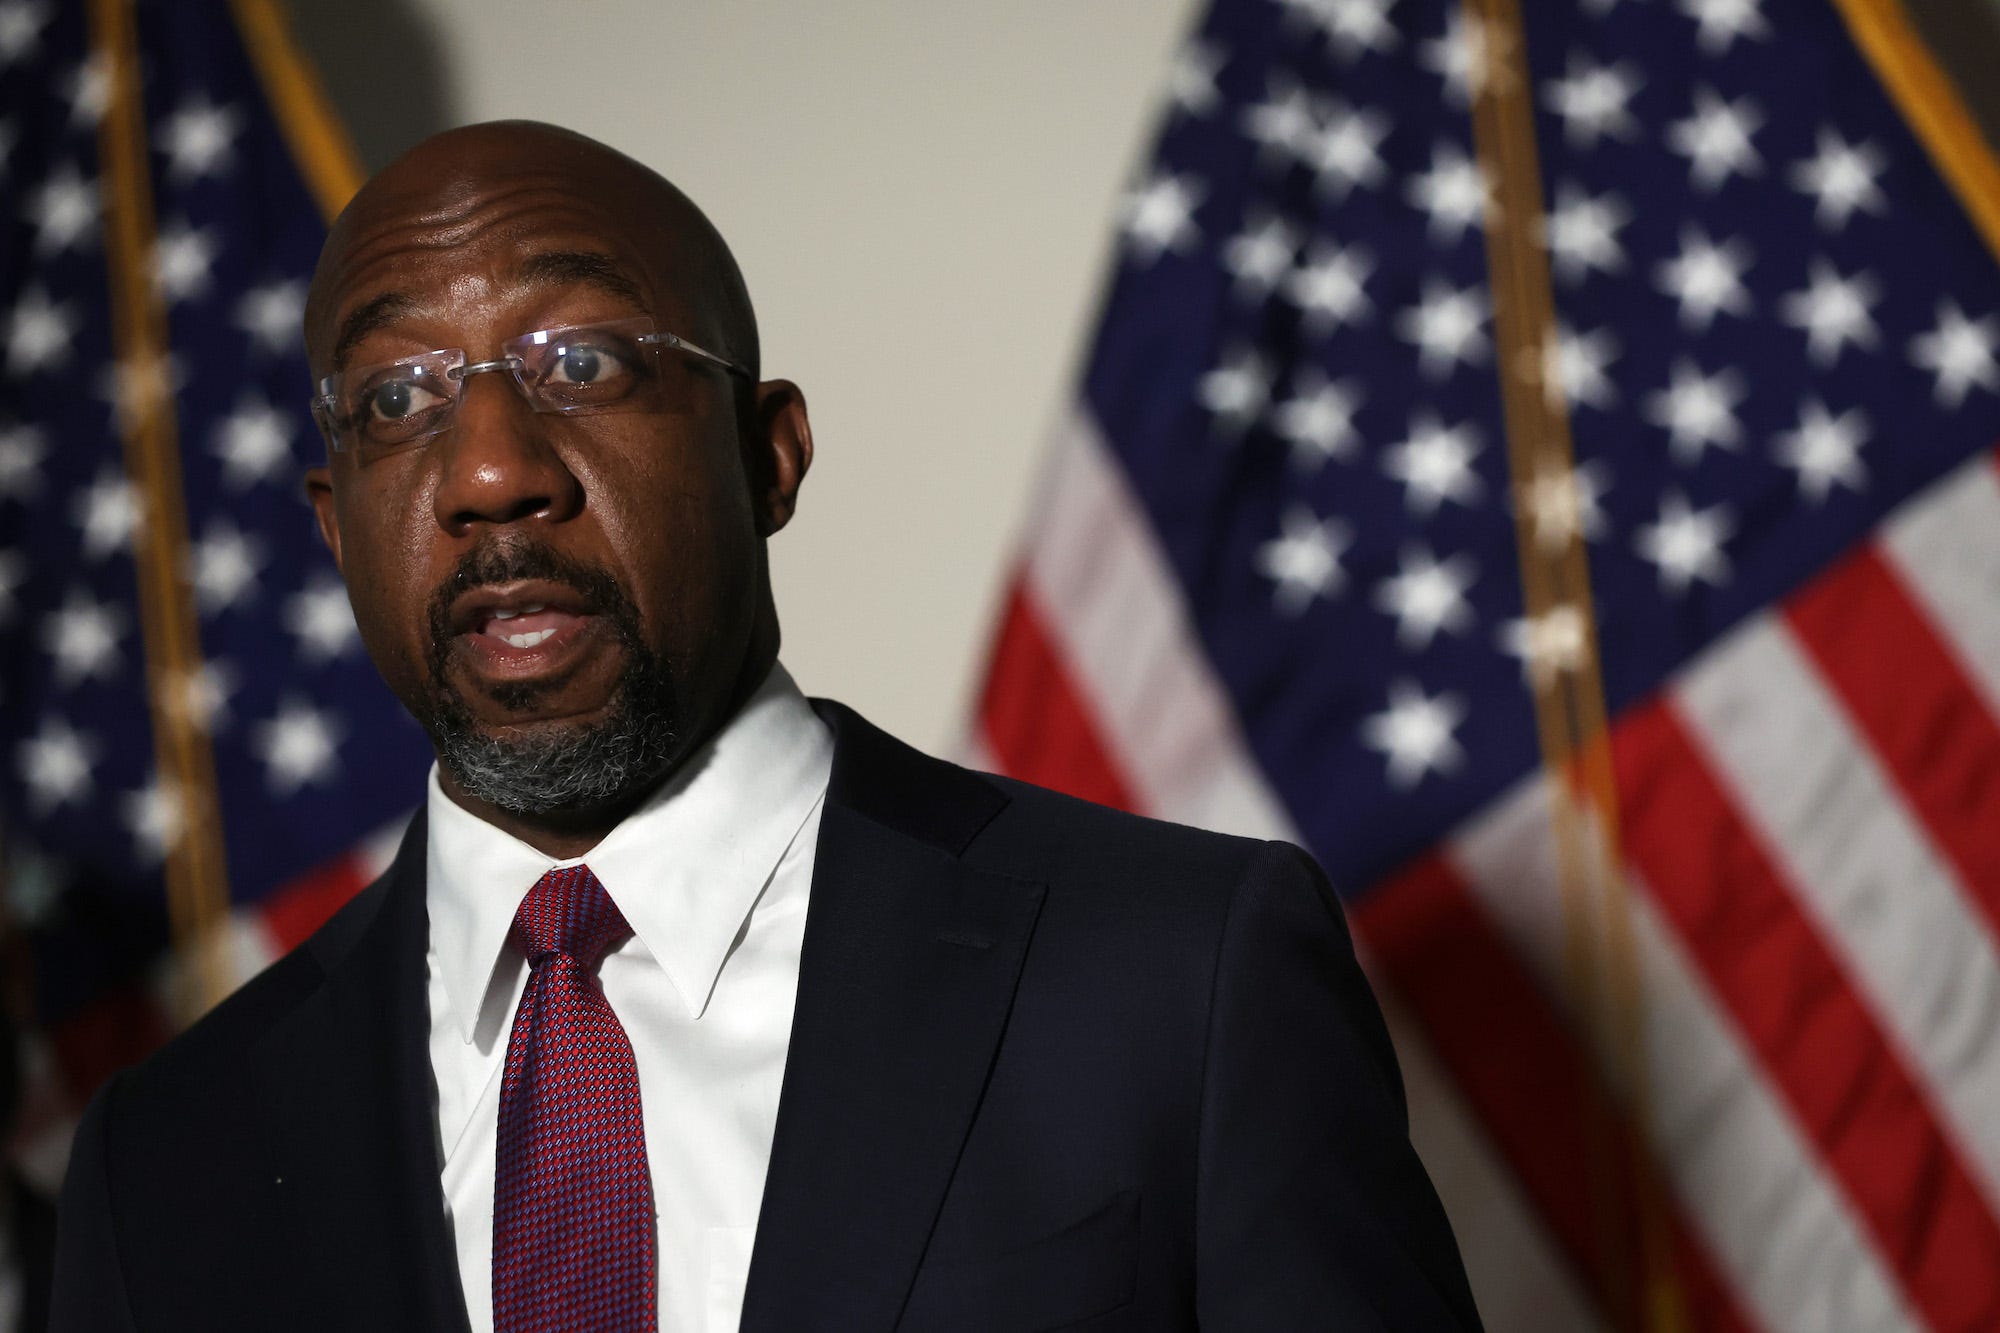 Suit-clad Democratic Sen. Raphael Warnock of Georgia speaks to reporters while standing against a backdrop of American flags at the US Capitol.